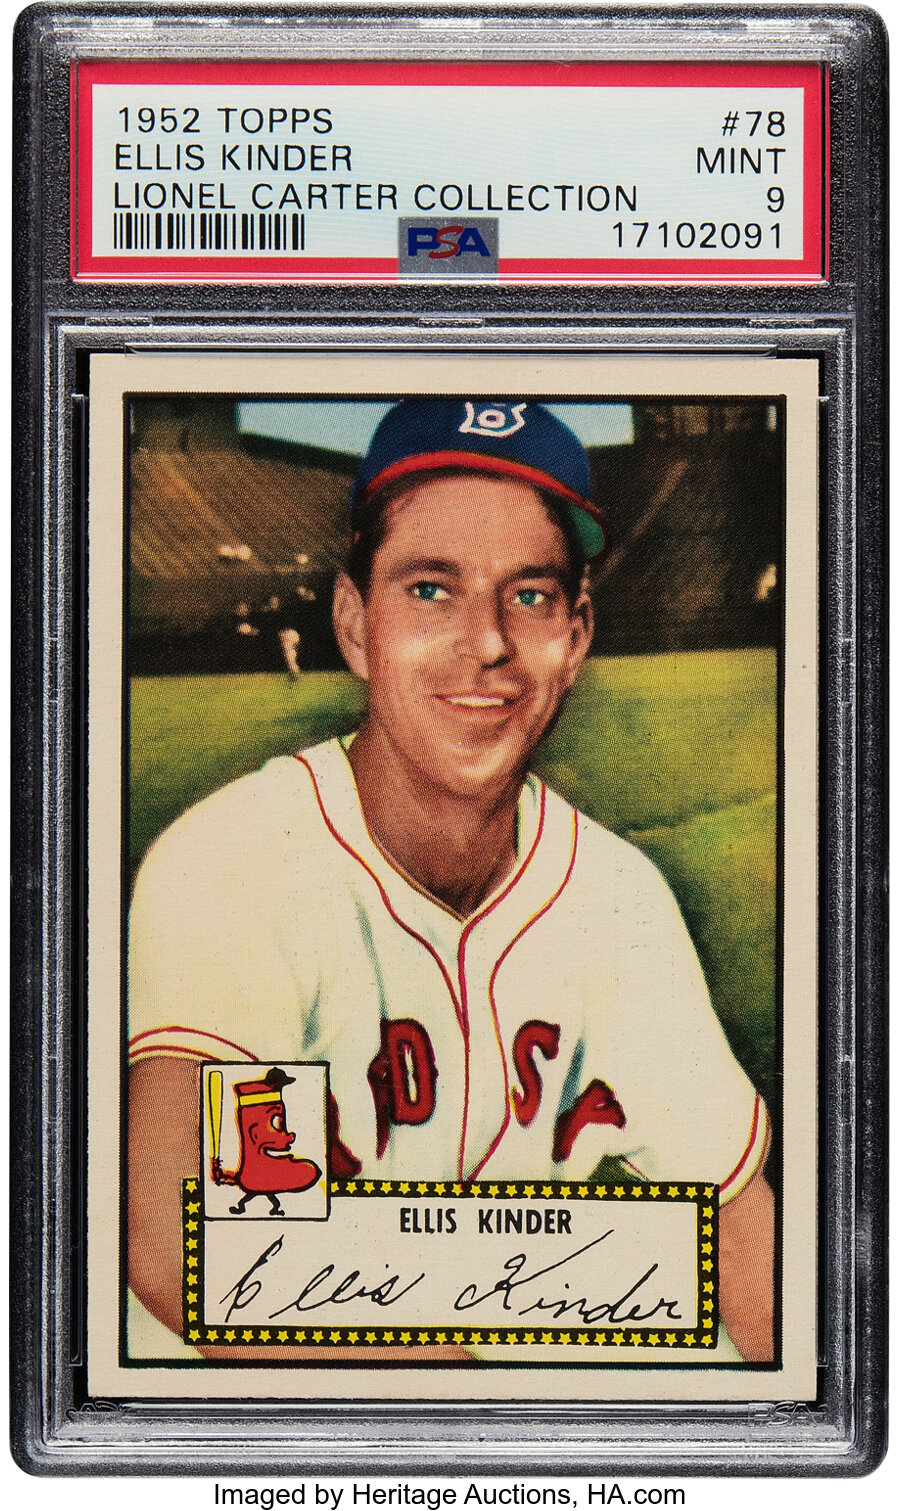 1952 Topps Ellis Kinder #78 PSA Mint 9 - Pop Two, None Superior! From the Lionel Carter Collection